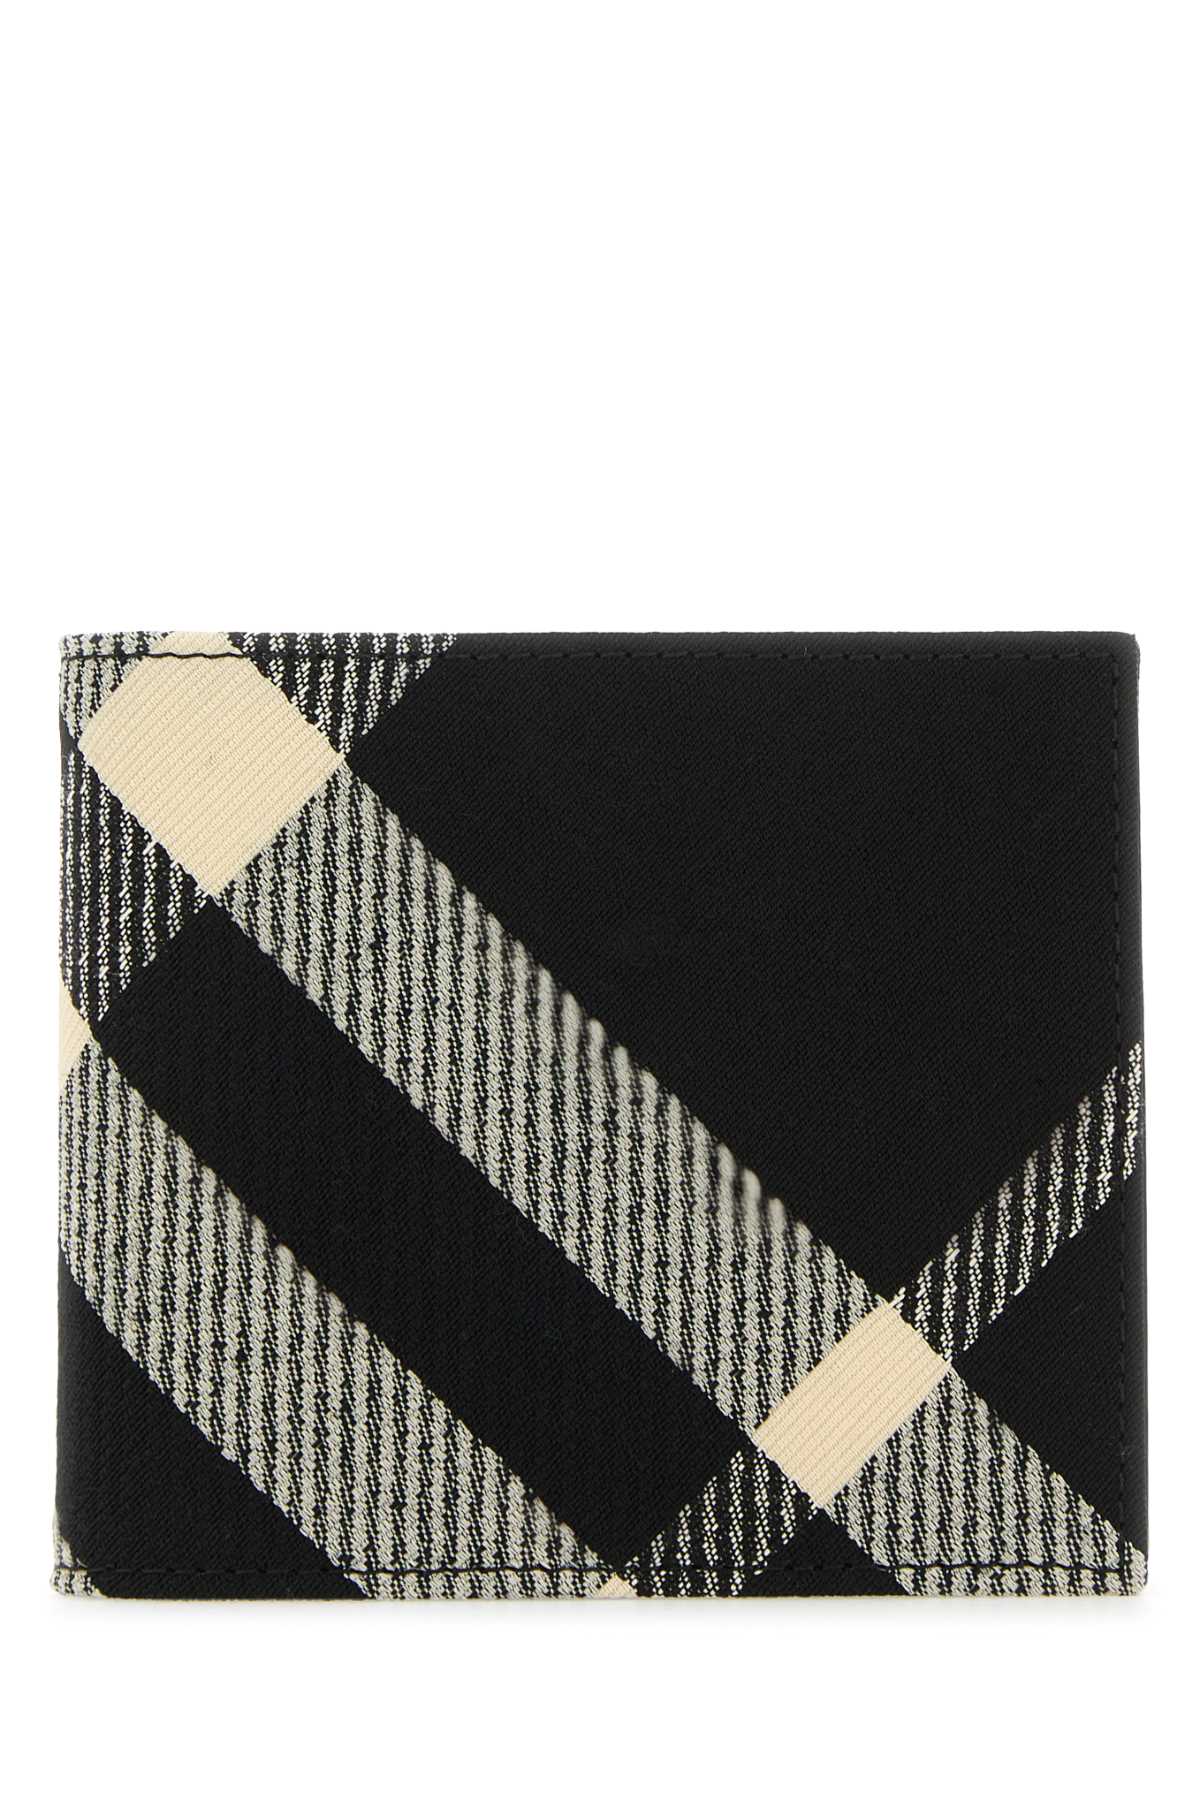 Burberry Embroidered Canvas Wallet In Blackcalico